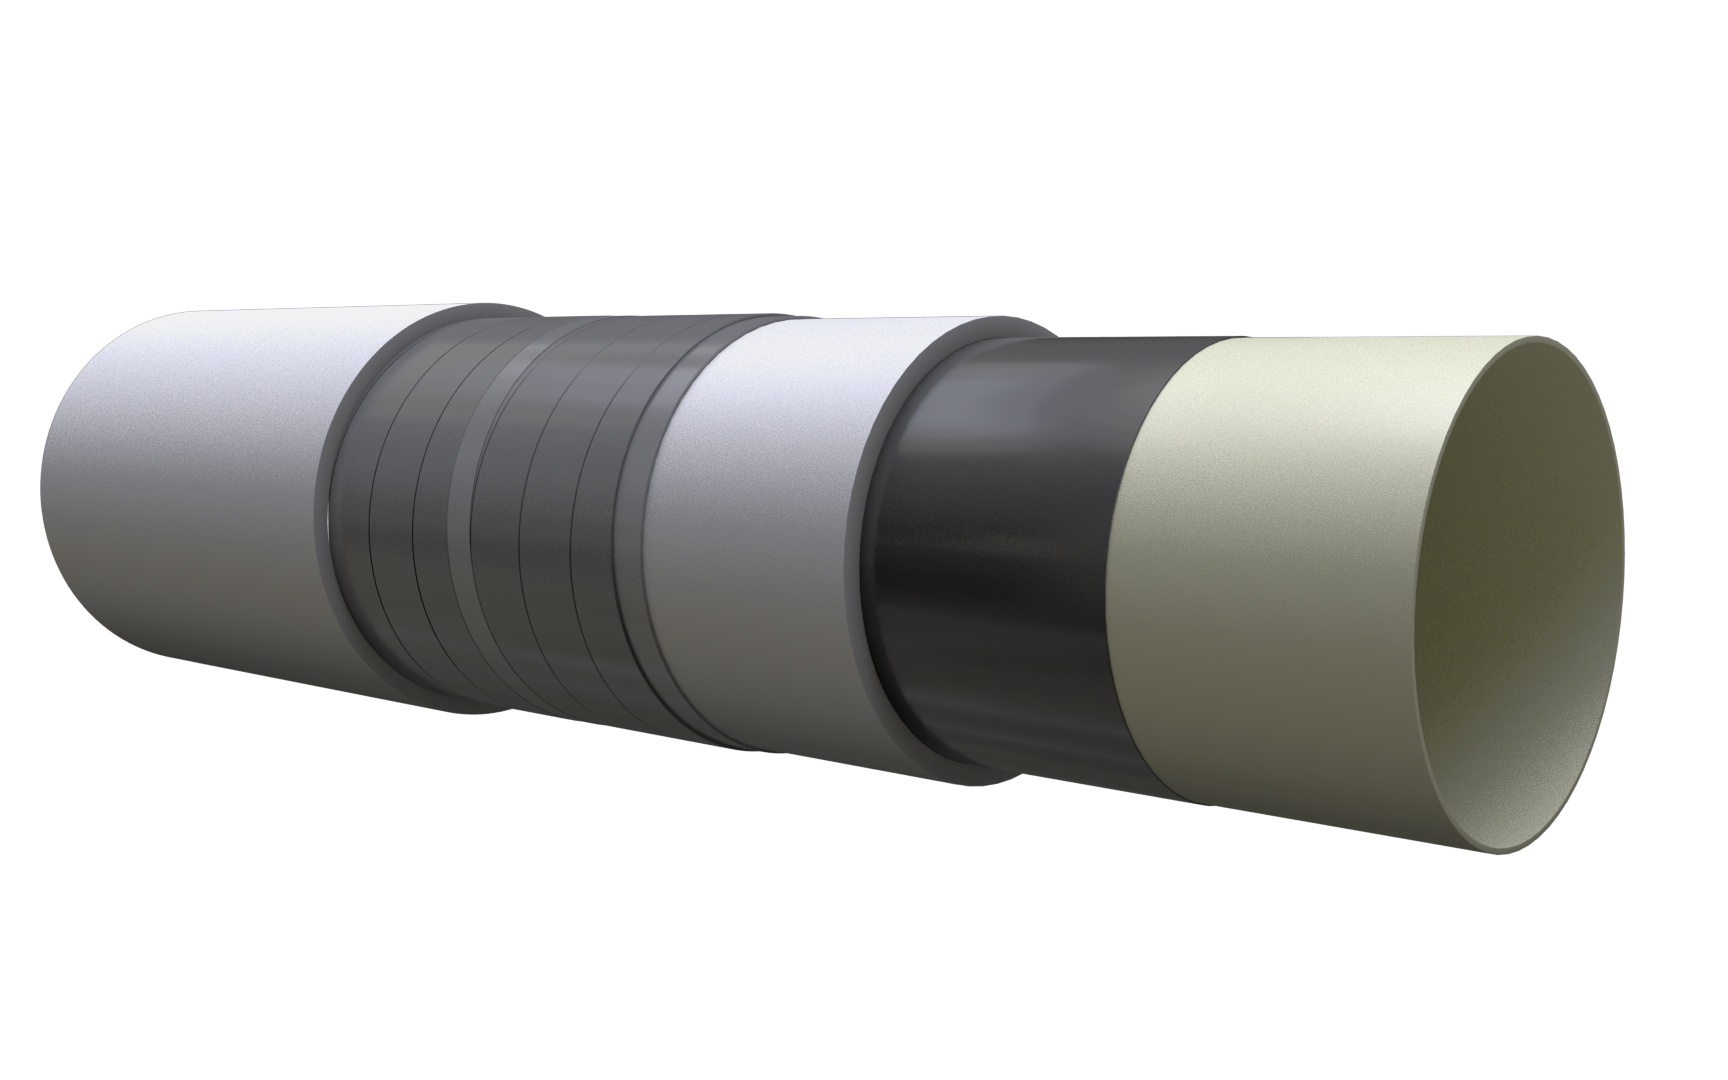 Rendering of composite line pipe for oil and gas and new energy applications